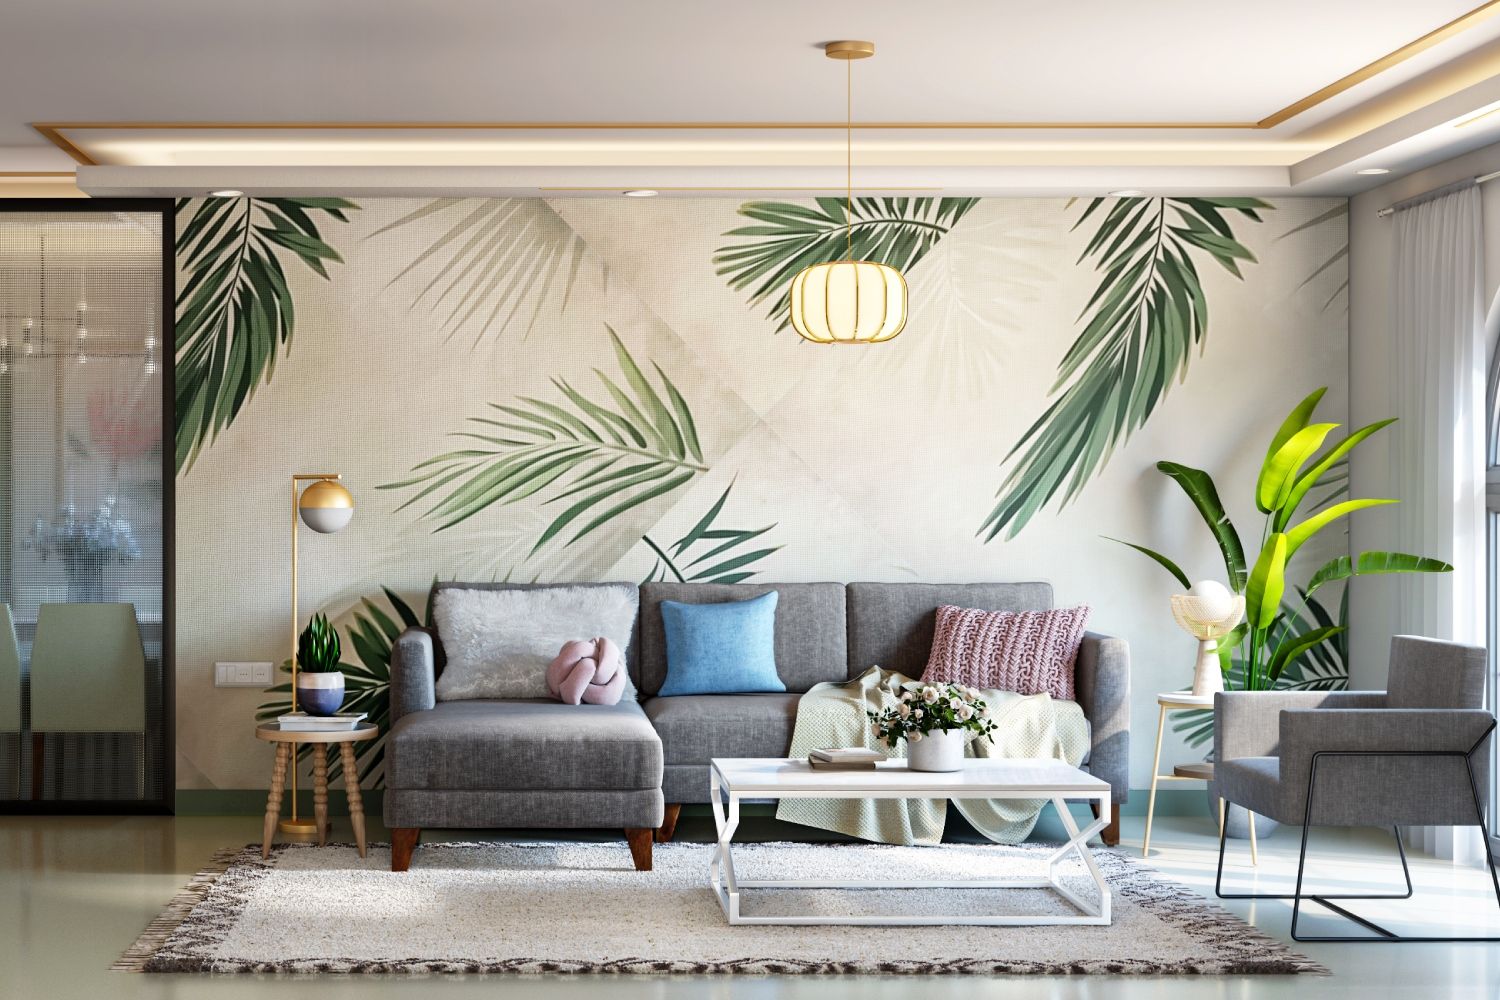 Tropical Living Room Wallpaper Design With Textured Leafy Motifs